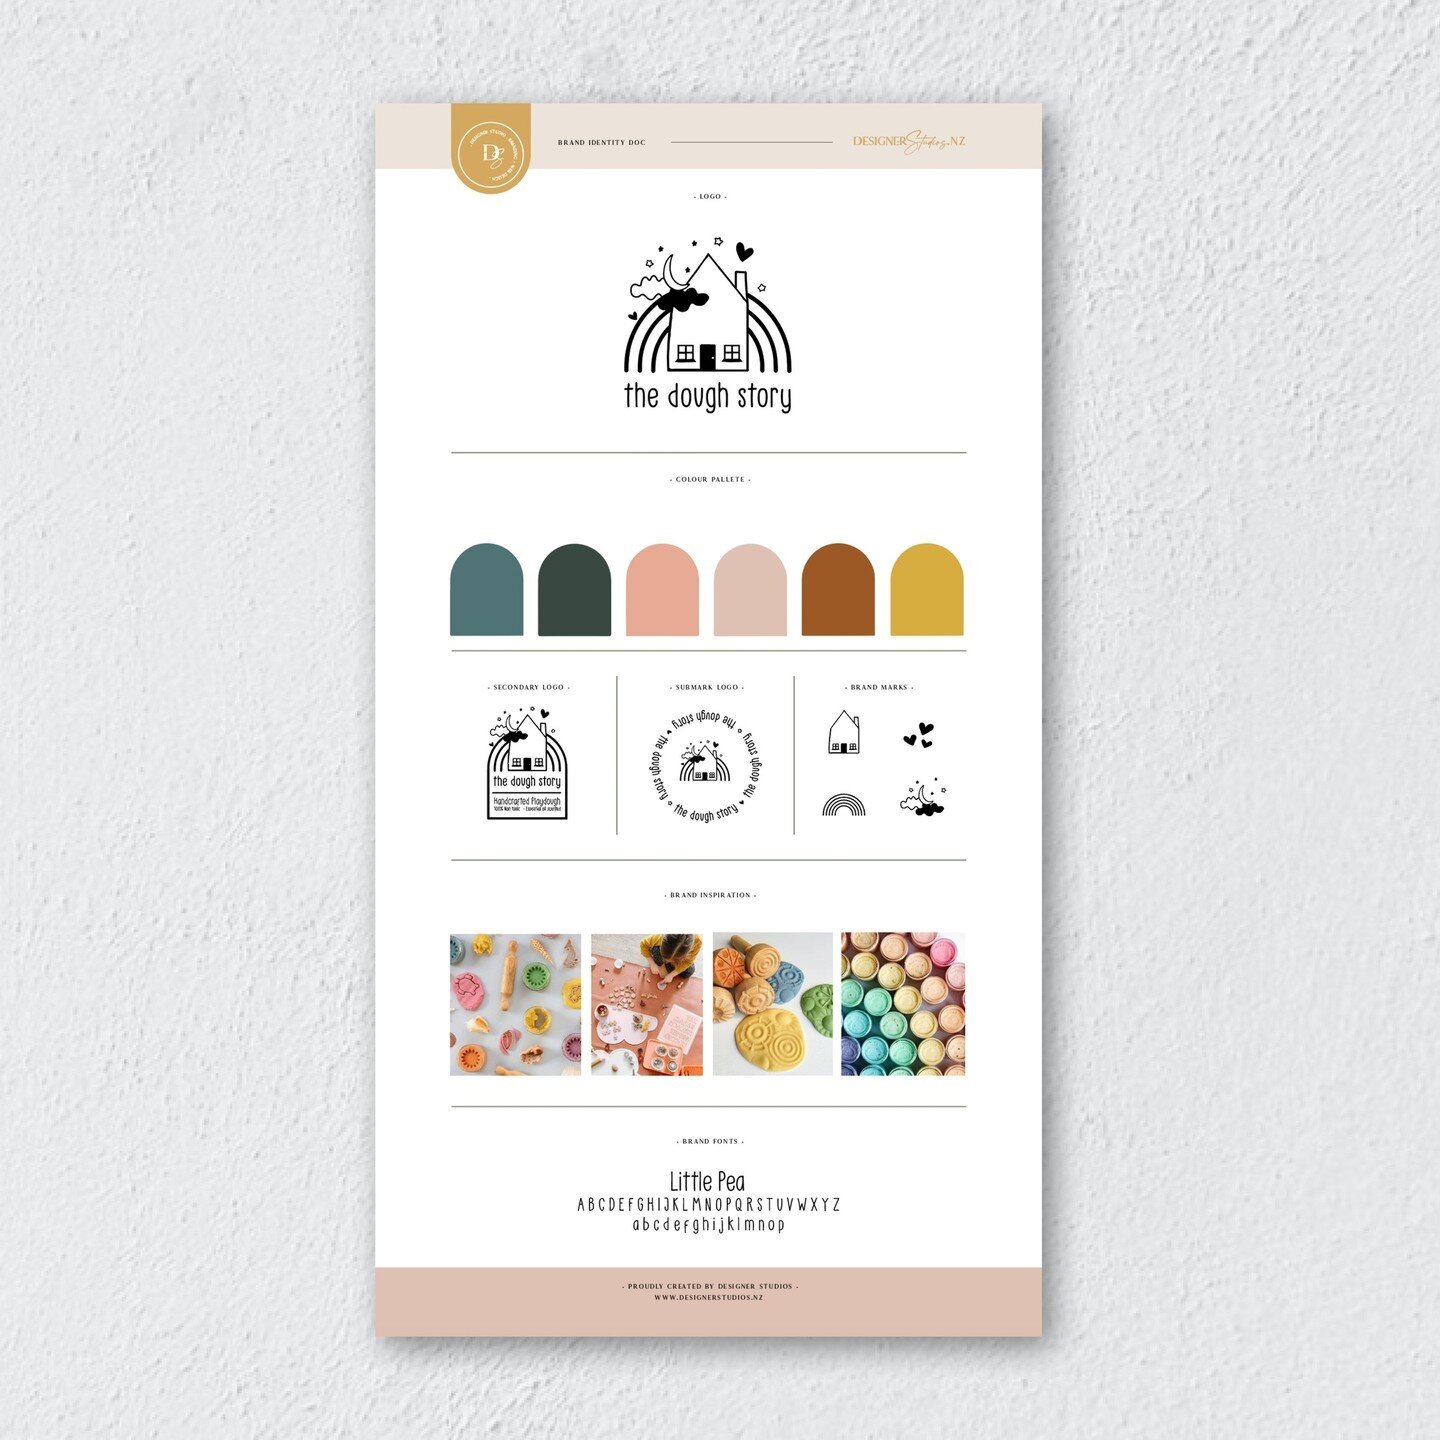 Mini Brand Docs 💛 A simple way for clients to be able to view their whole brand vision in one easy doc. We create these for all our clients no matter what package you chose. ⁠
.⁠
.⁠
.⁠
.⁠
.⁠
.⁠
..⁠
.⁠
#branding #design #graphicdesign #marketing #des